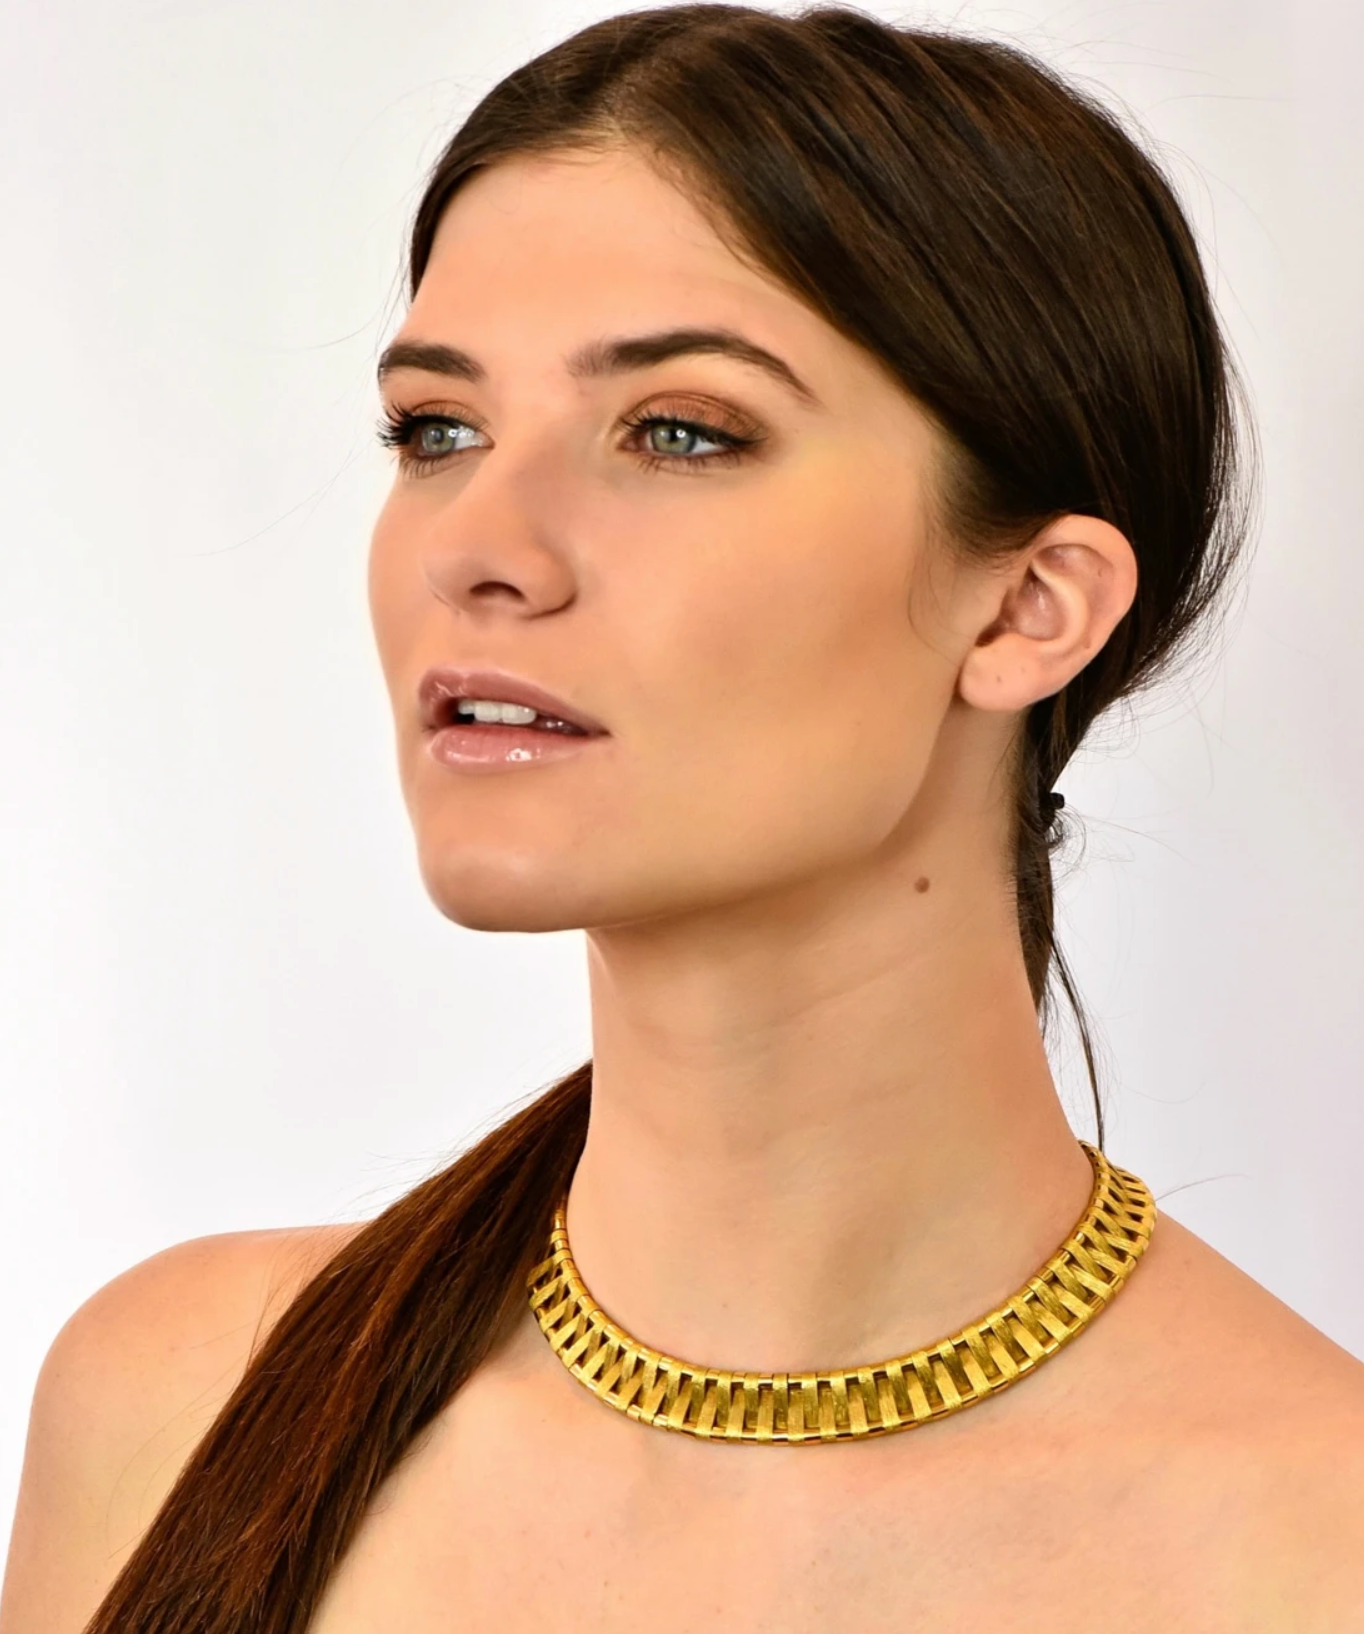 Model wearing Cartier 18 Karat Gold Egyptian Inspired Collar Necklace Vintage Jewelry